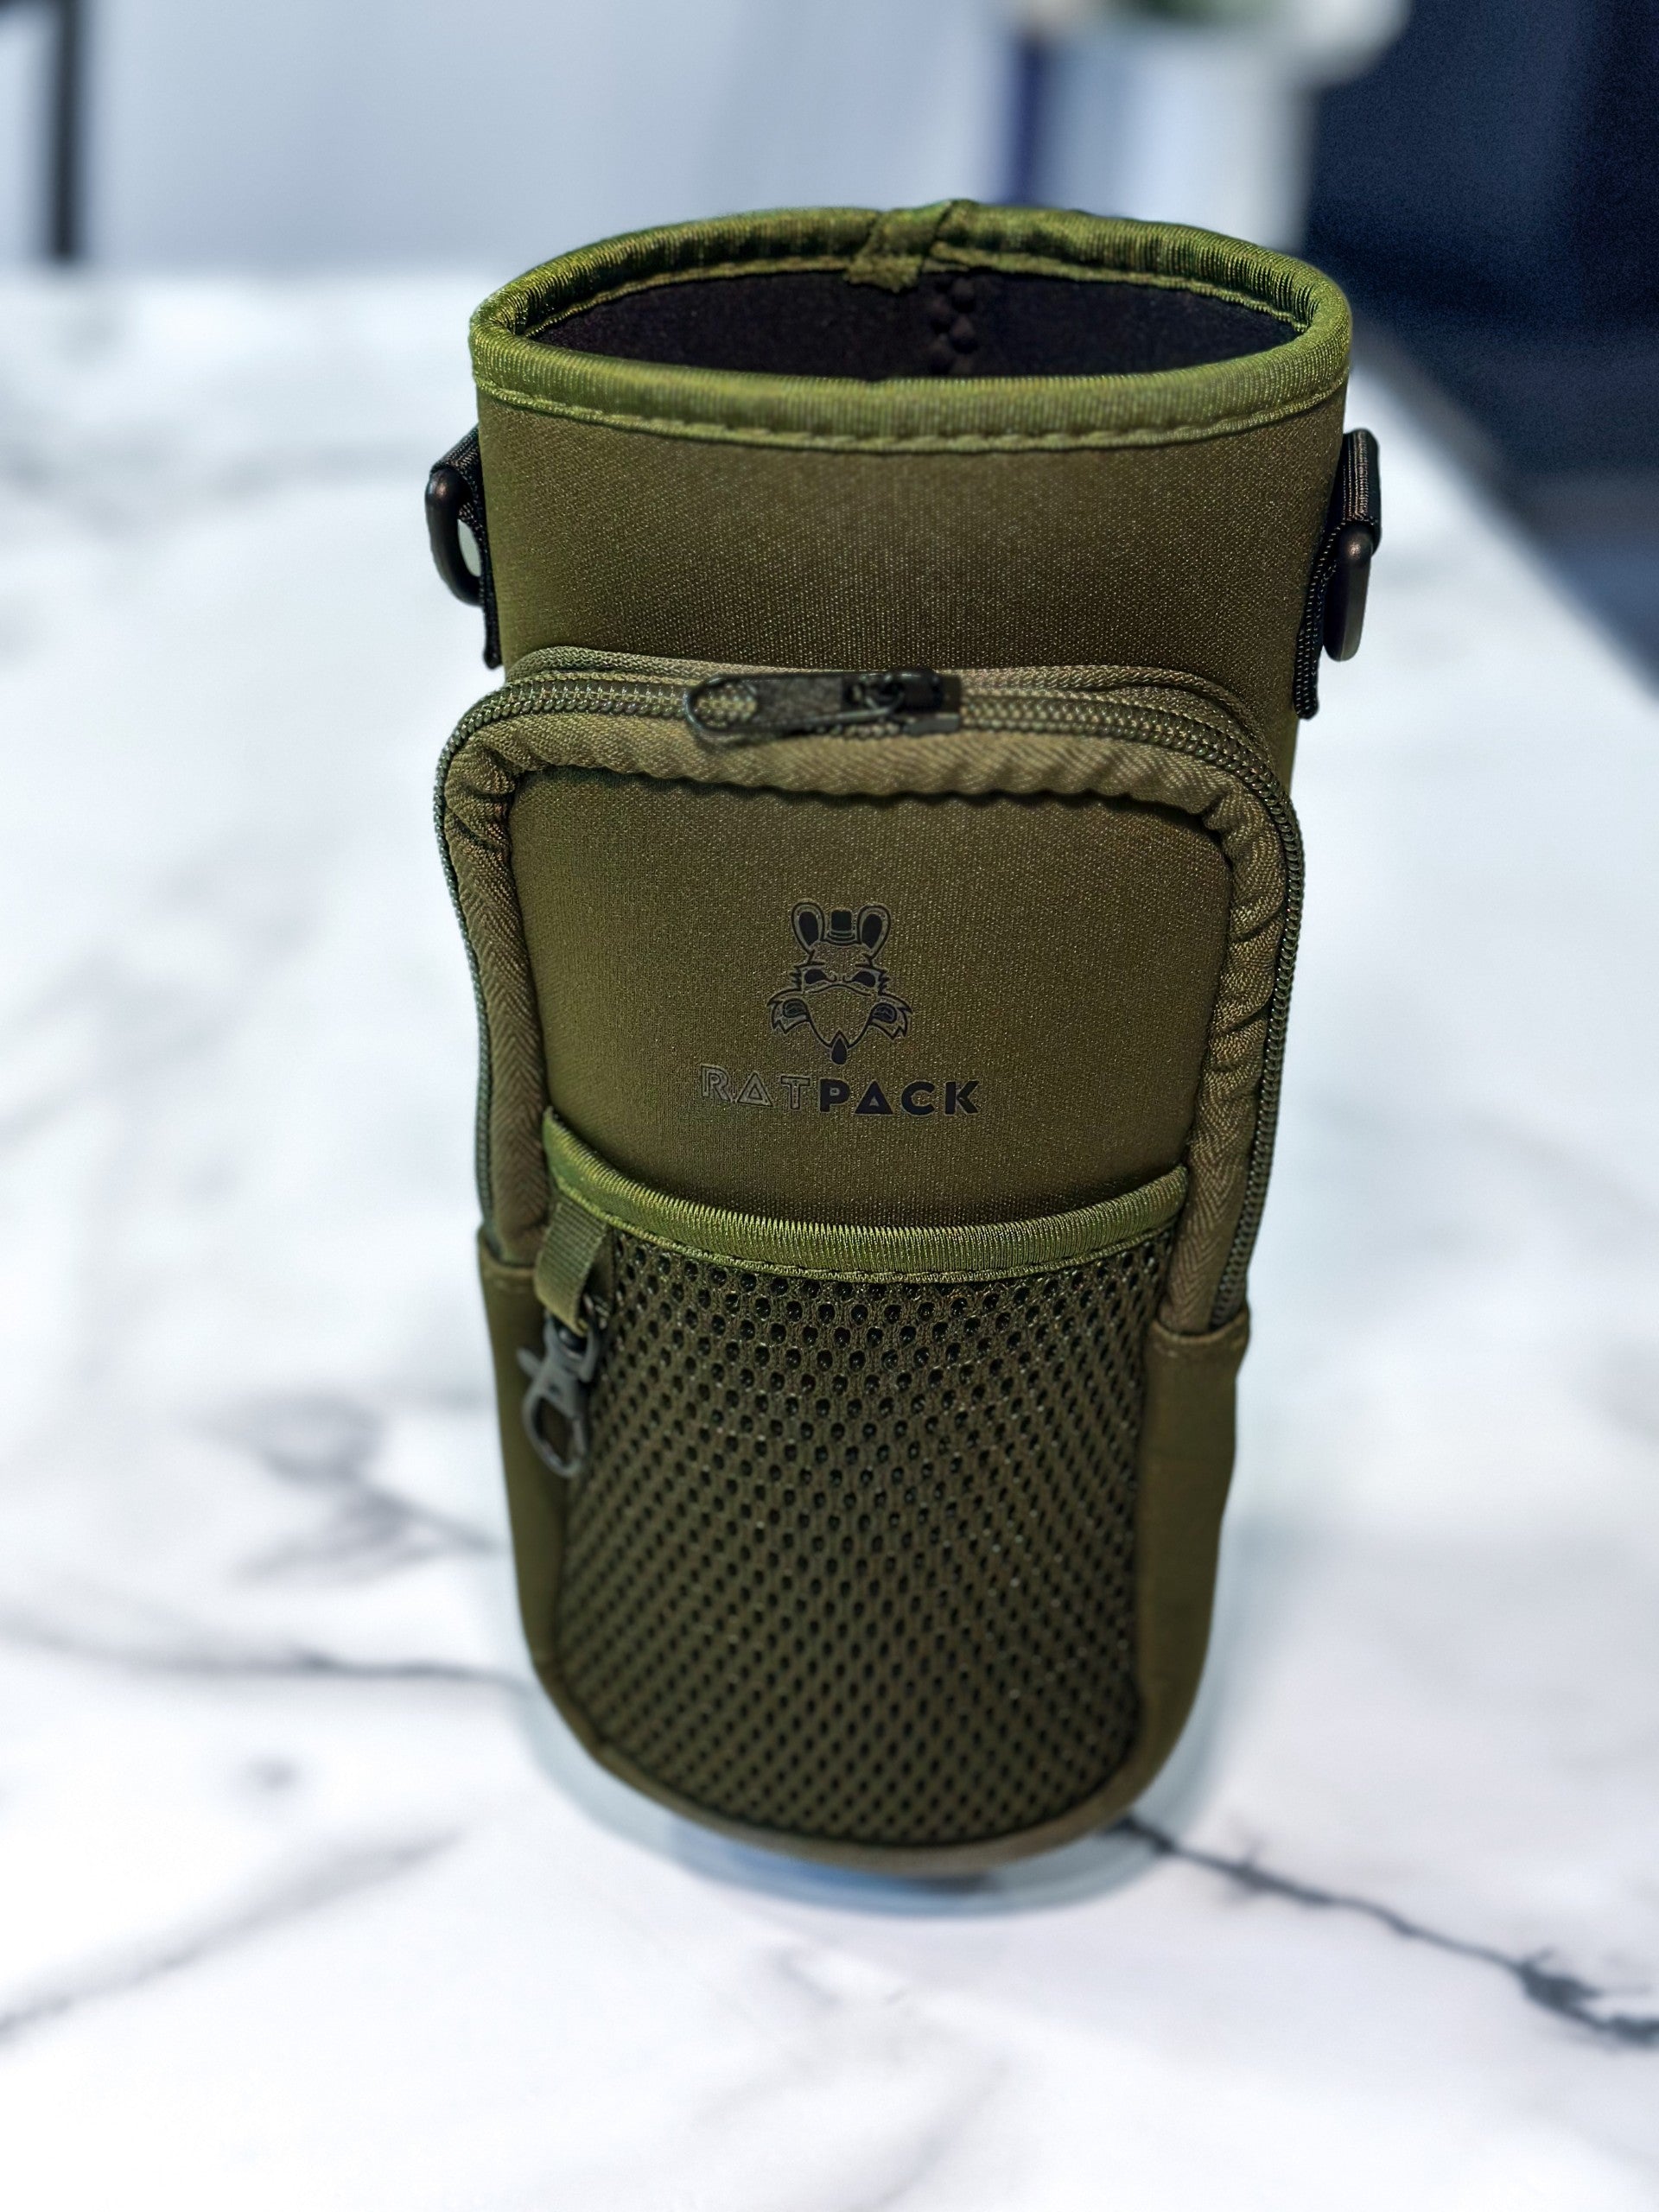 40 ounce/ 1.3 Liter water bottle sleeve insulated cross body carrier with pockets for phone and essentials, built in key chain army green